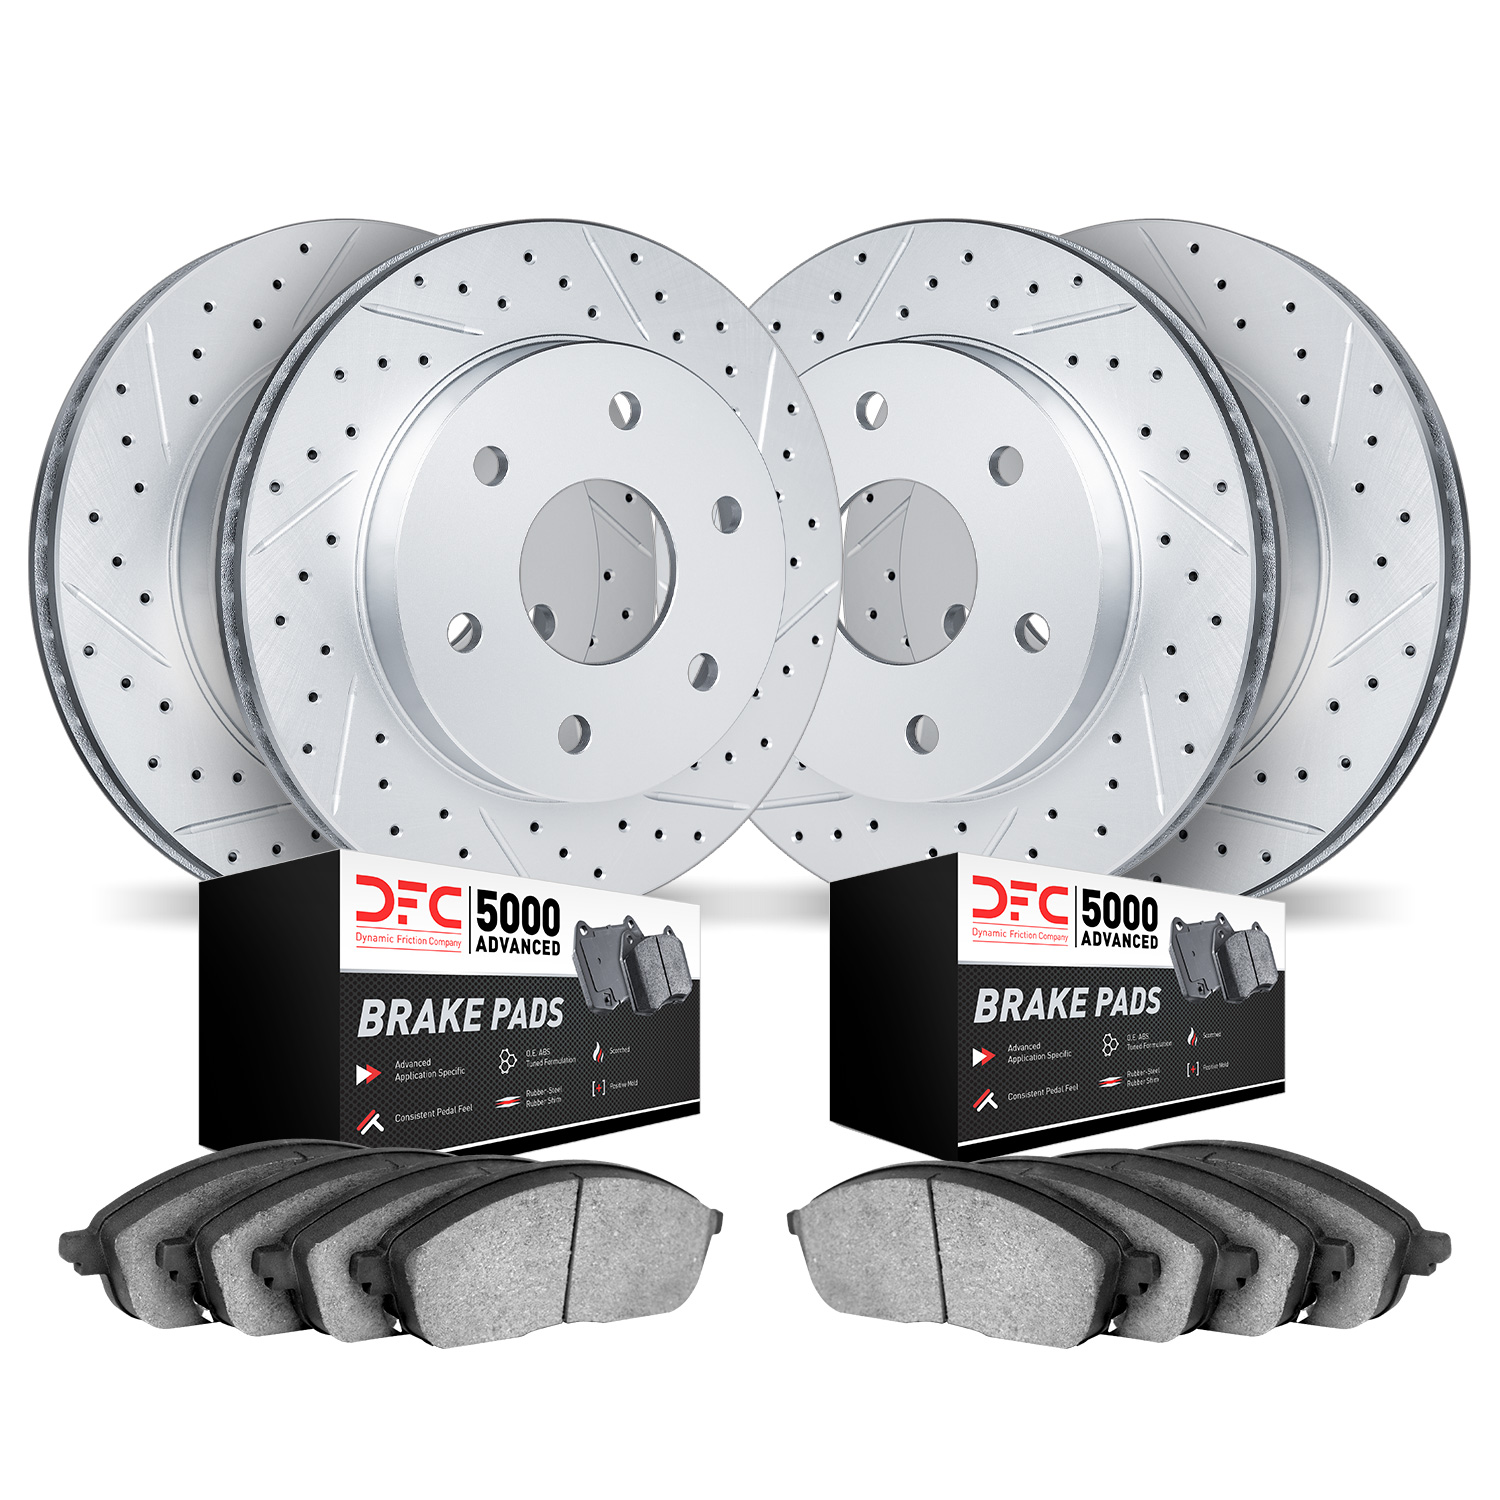 2504-54263 Geoperformance Drilled/Slotted Rotors w/5000 Advanced Brake Pads Kit, 2002-2006 Ford/Lincoln/Mercury/Mazda, Position: